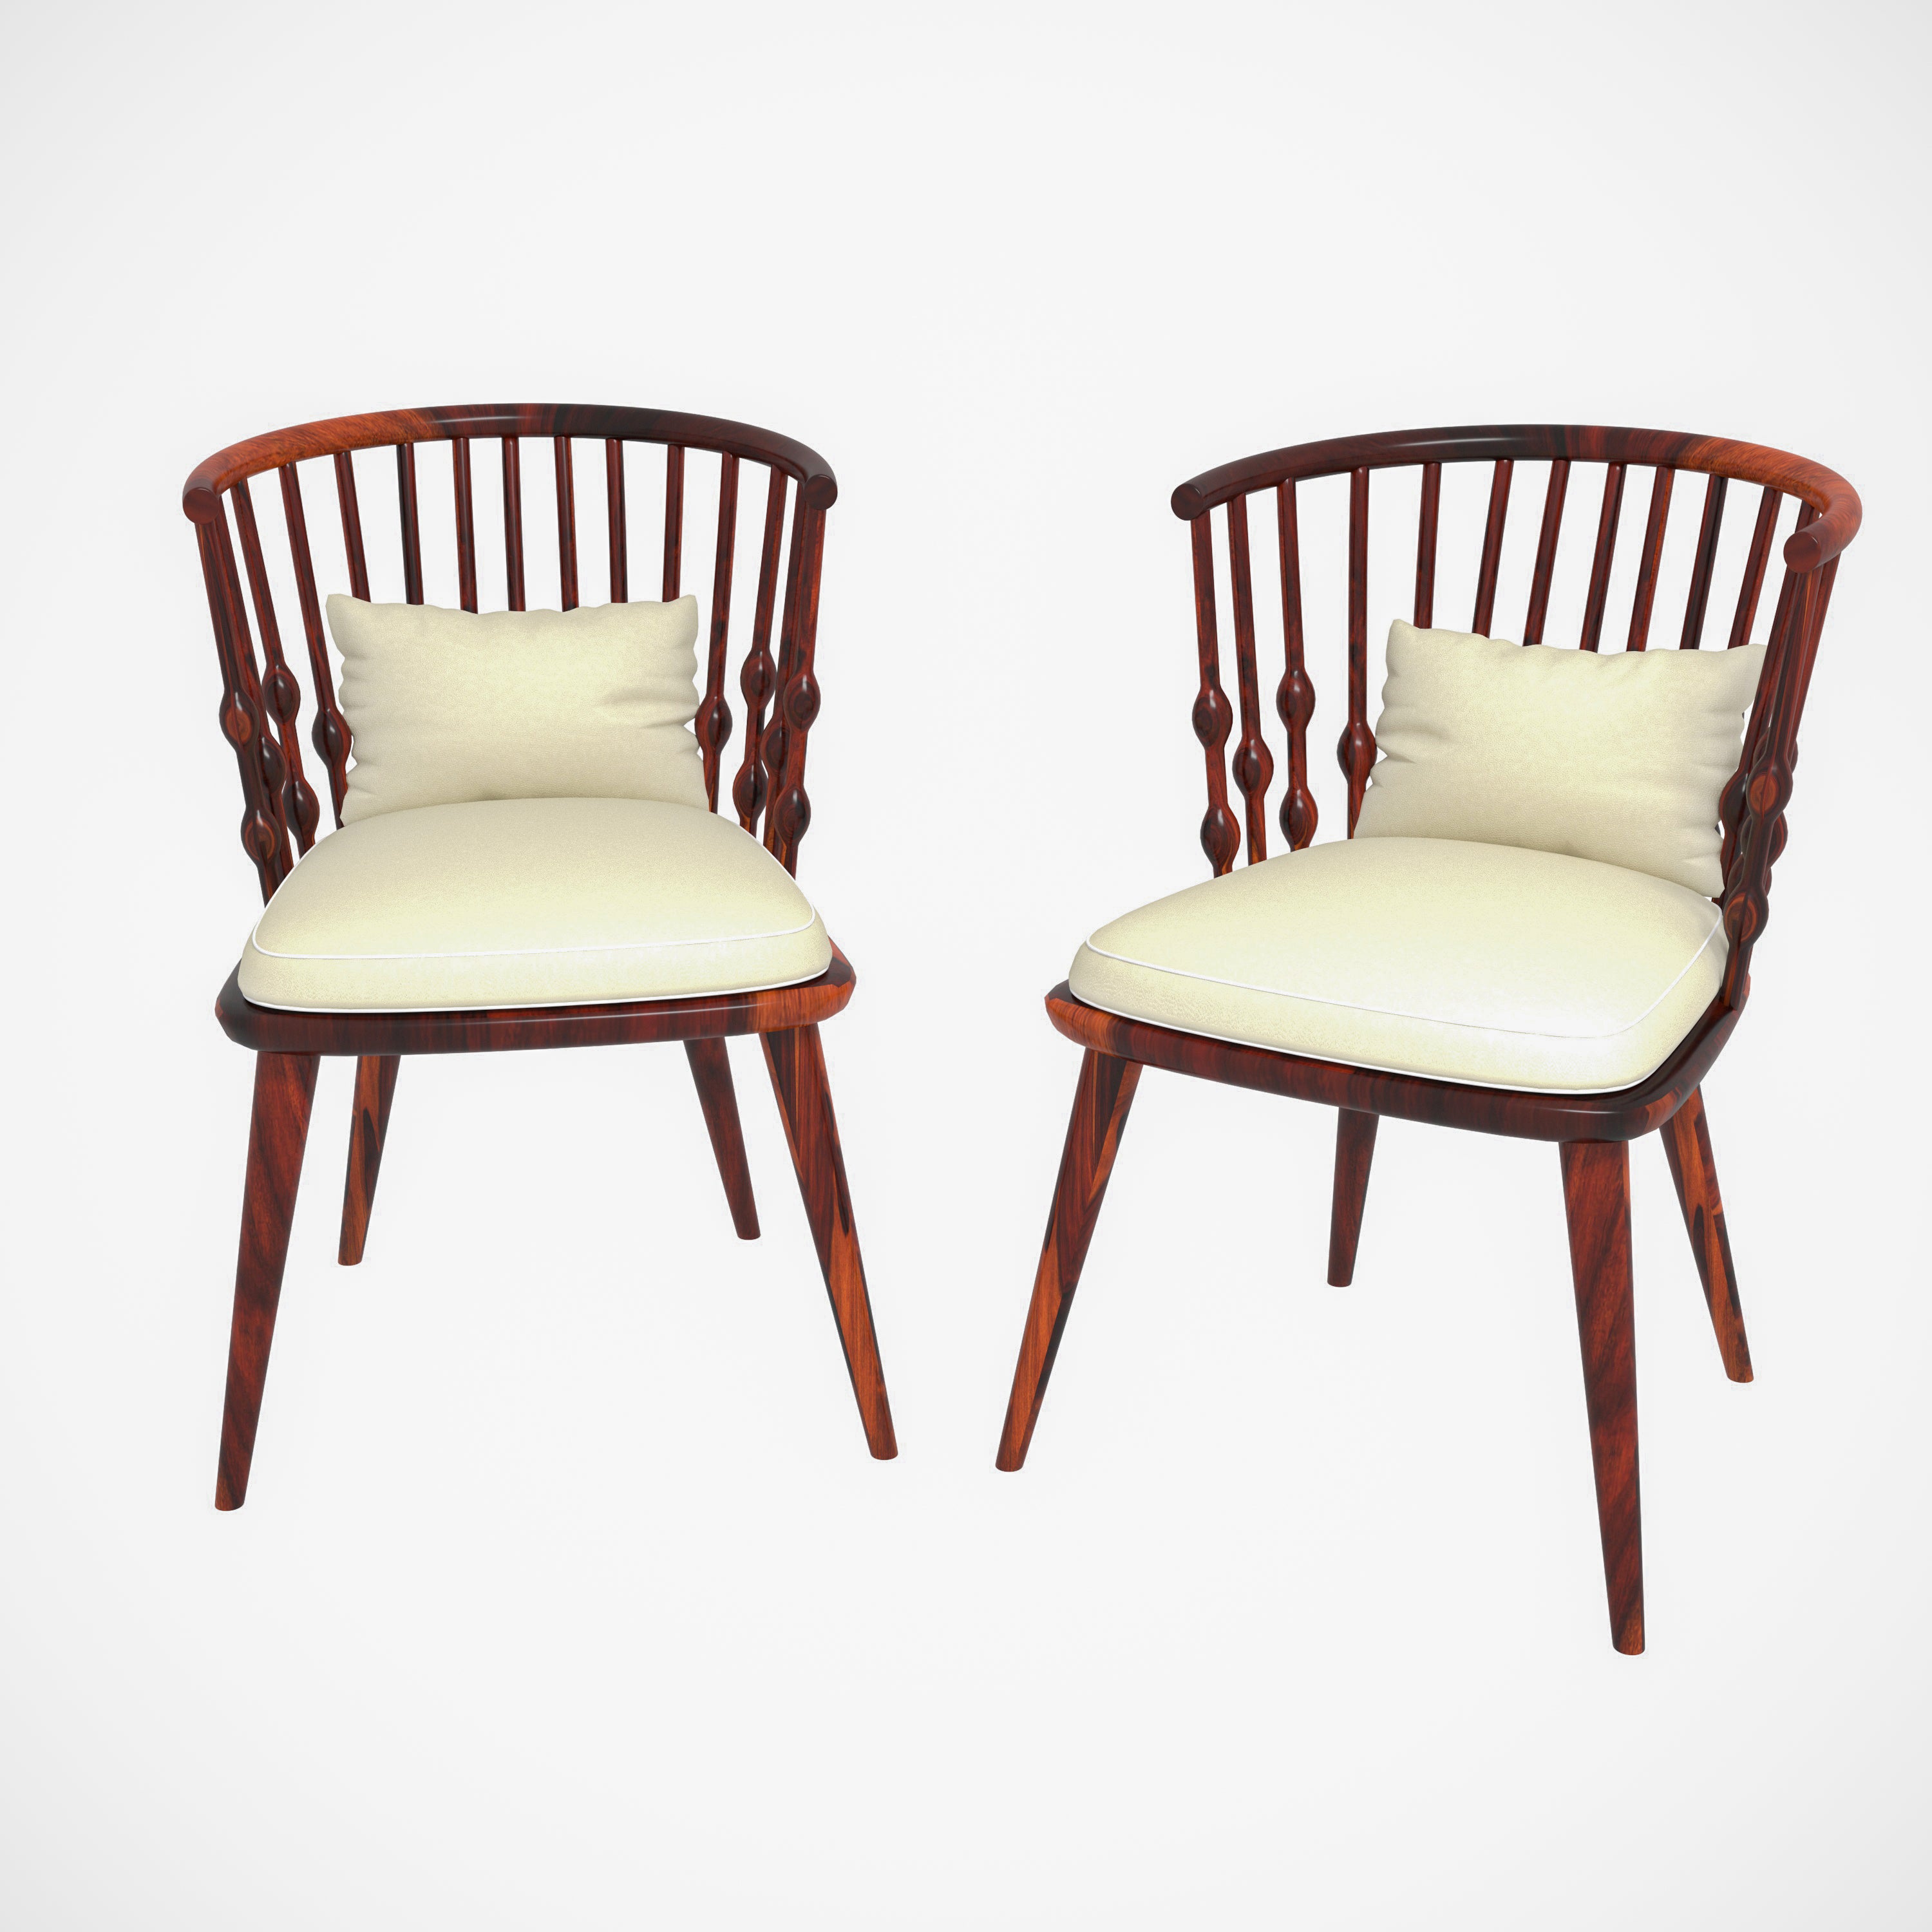 Retro Times Stylish Curved Back Wooden Handmade Chair Set of 2 Dining Chair